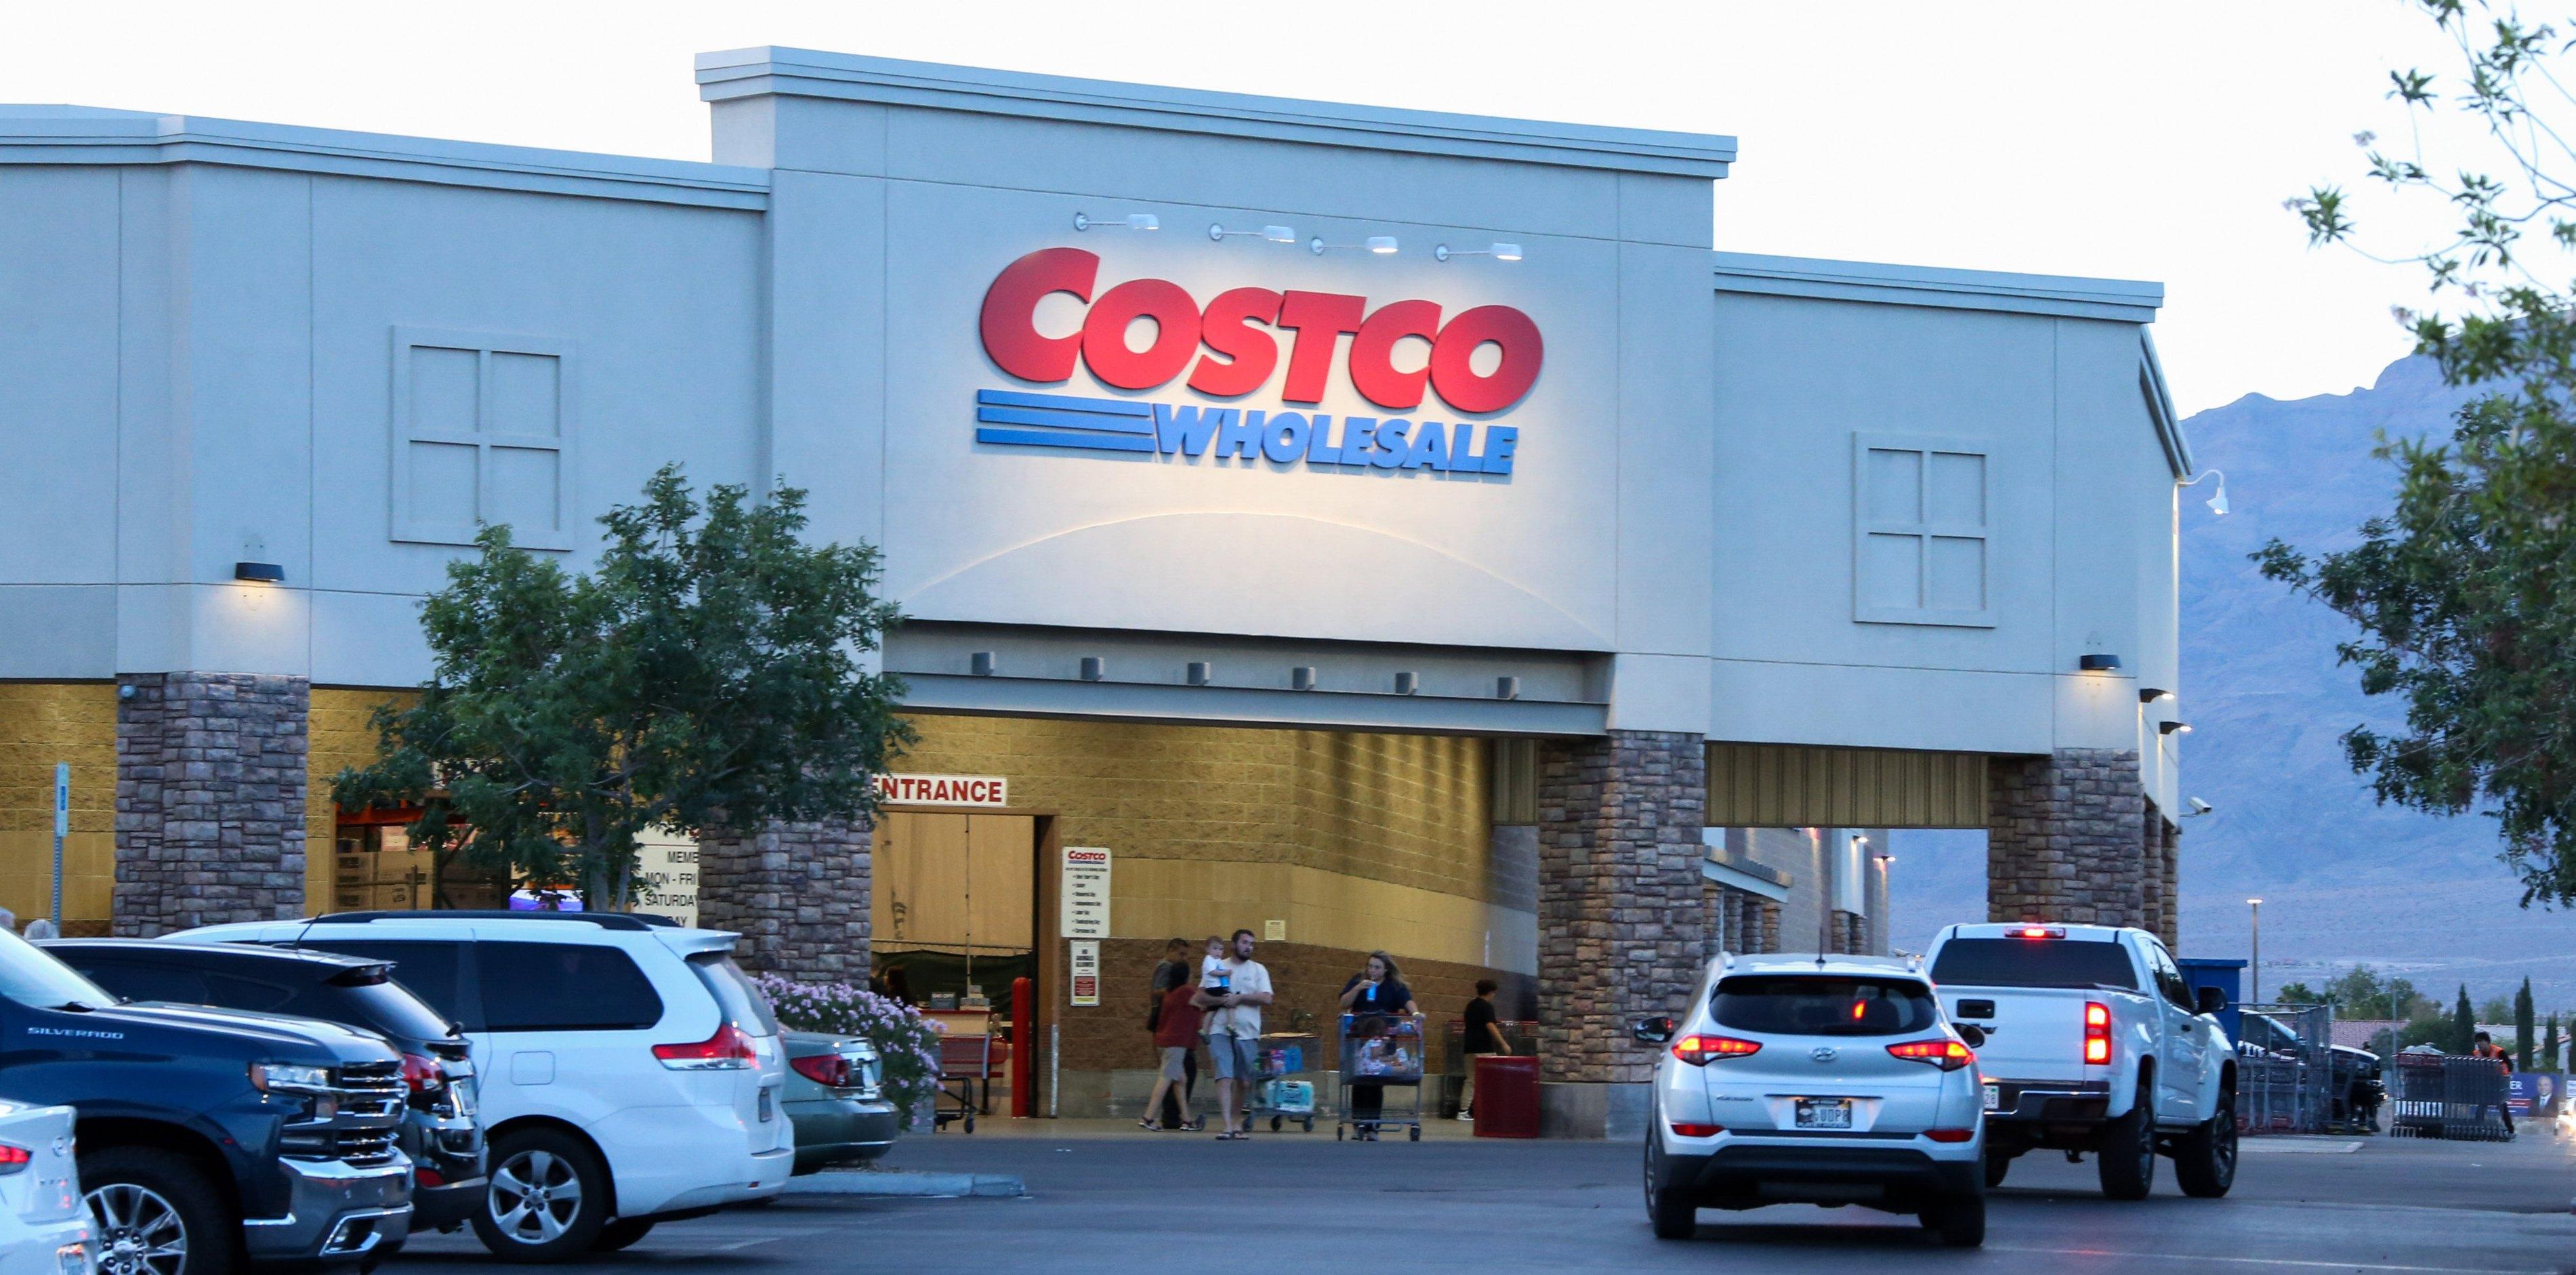 Costco's 157-Piece Le Creuset Set Is Causing a Frenzy Online